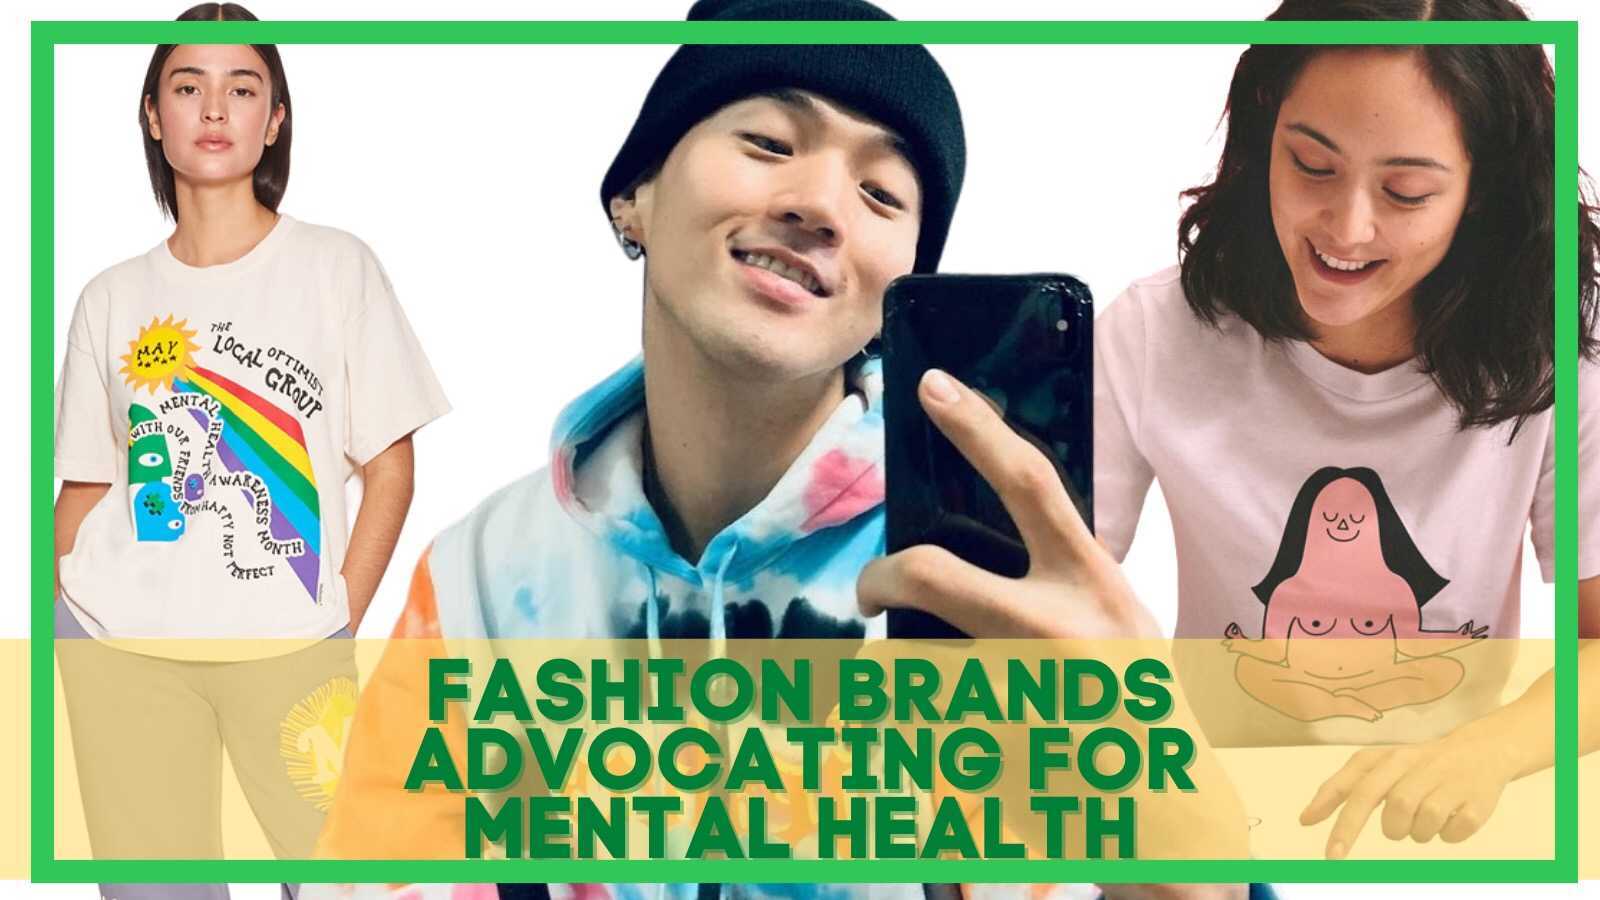 Fashion brands advocating for mental health